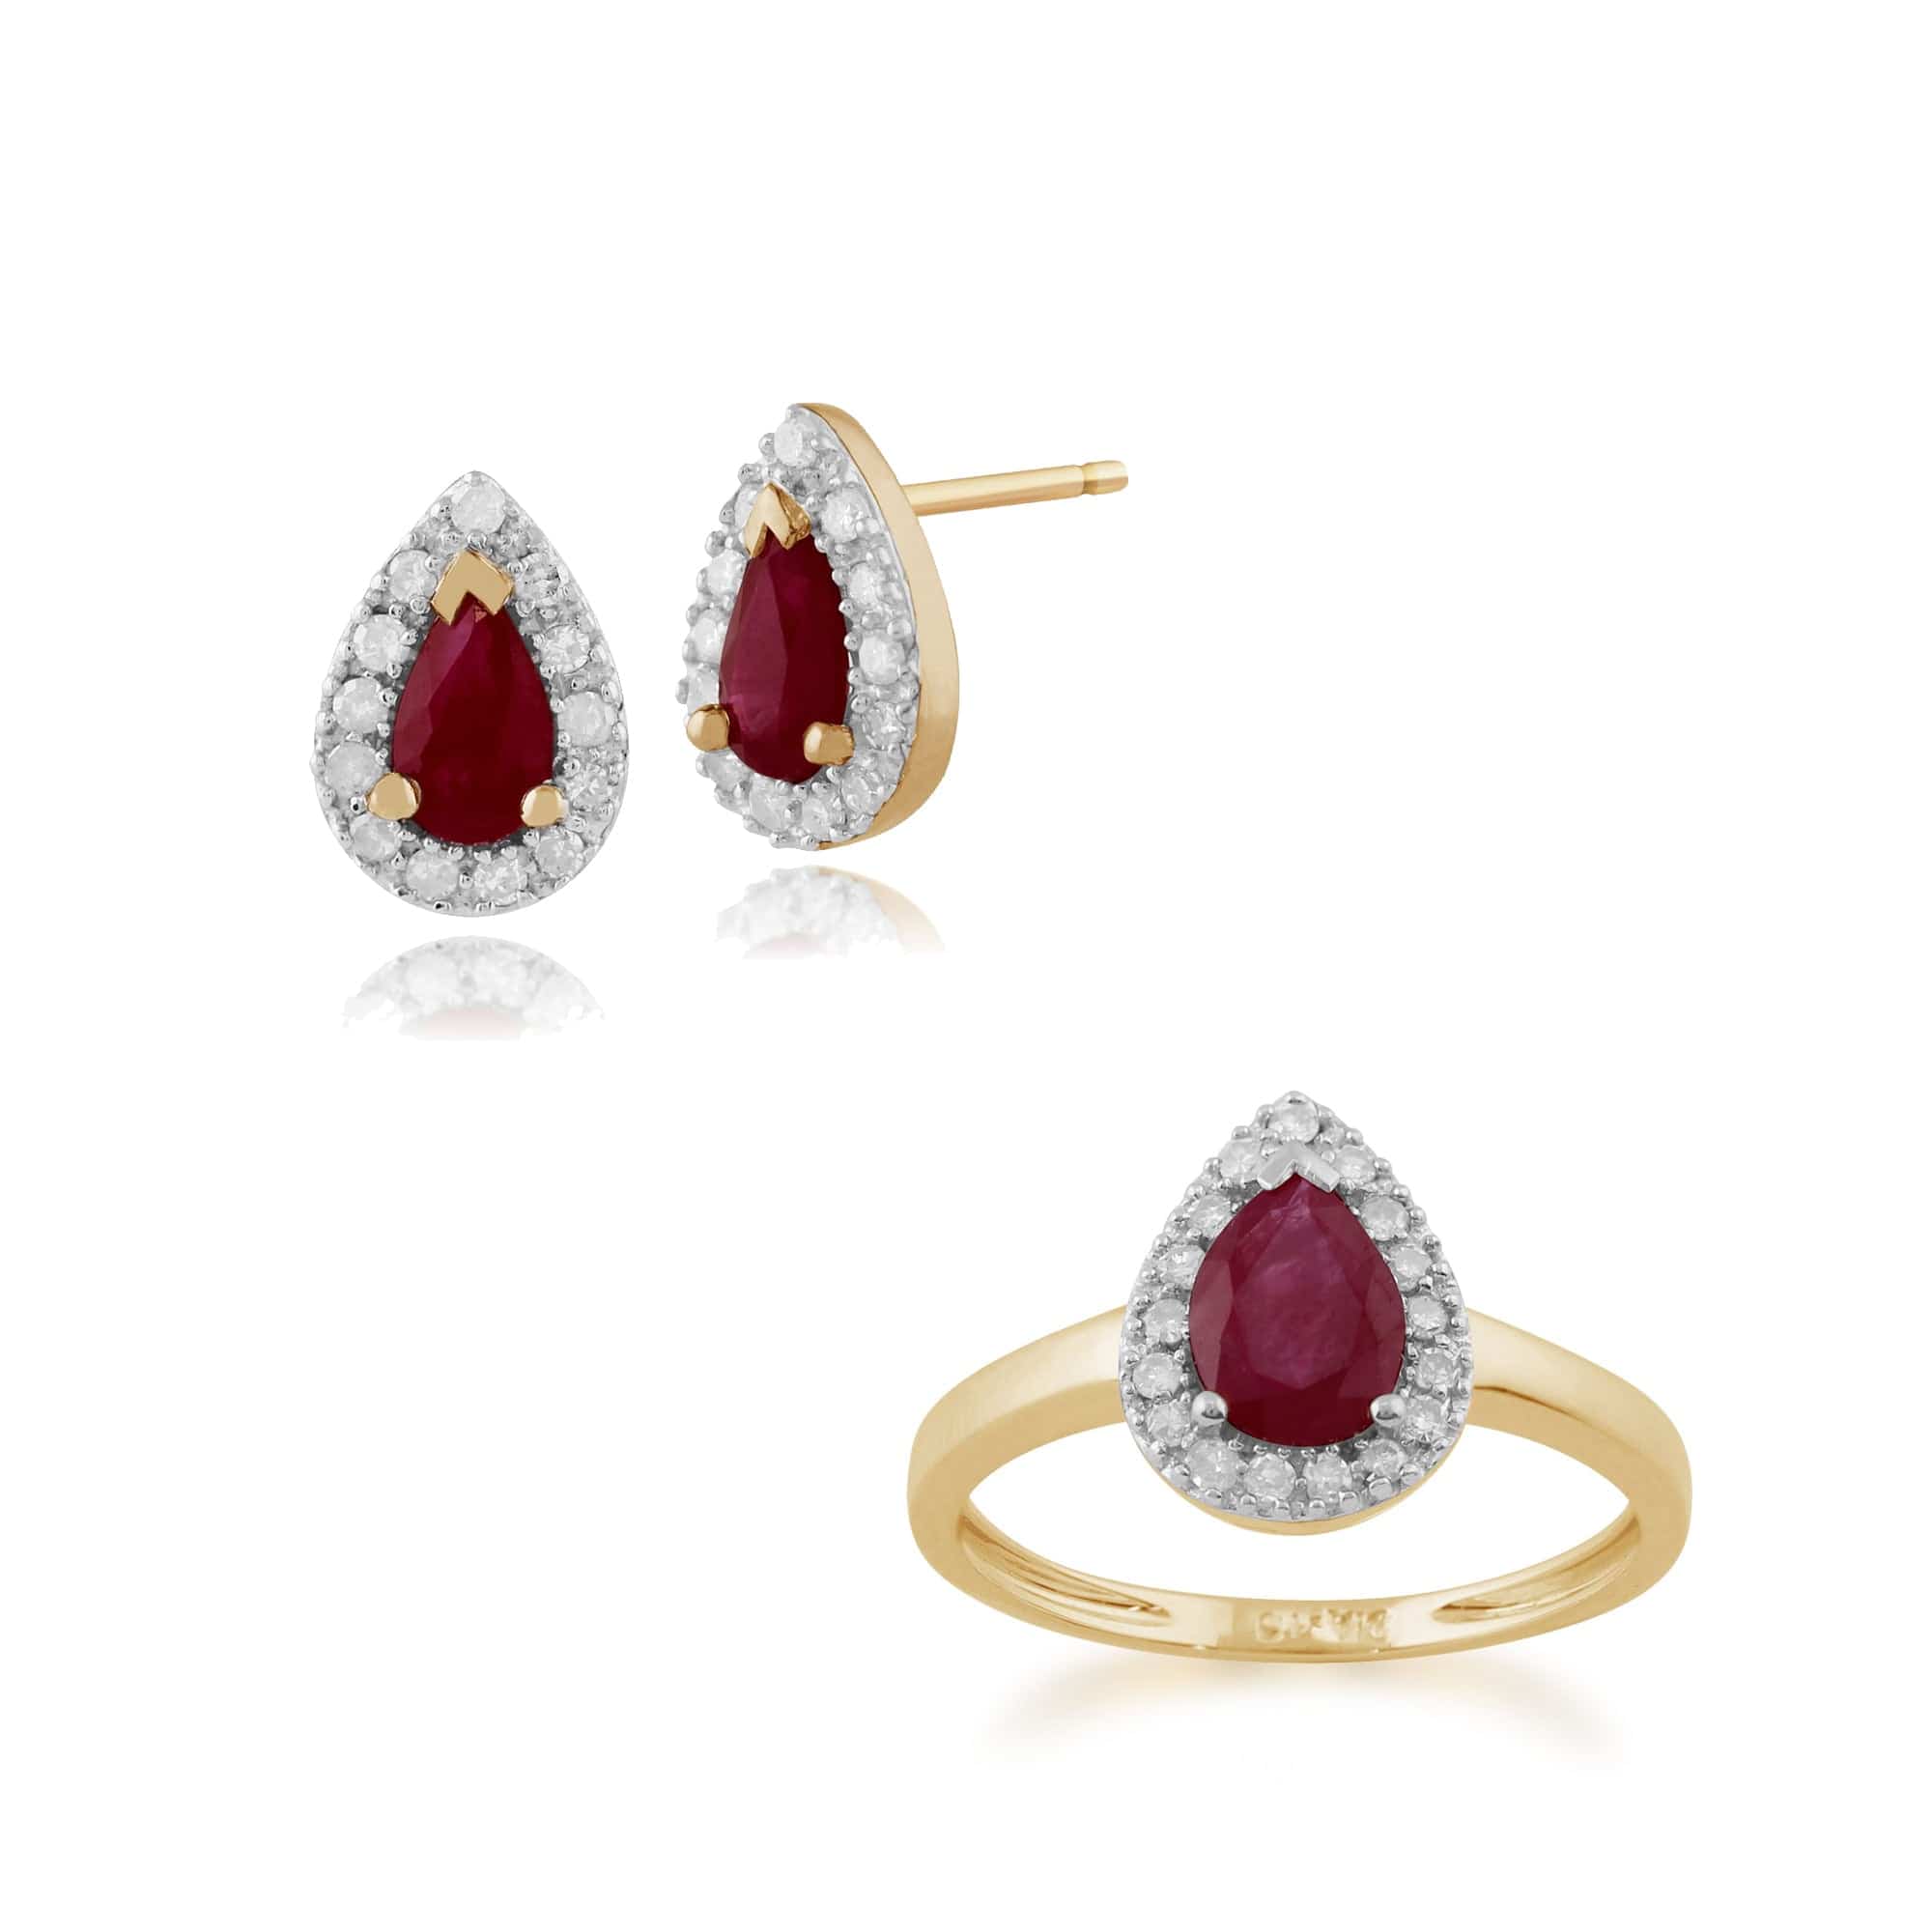 24232-22617 Classic Pear Ruby & Diamond Halo Stud Earrings & Ring Set in 9ct Yellow Gold 1